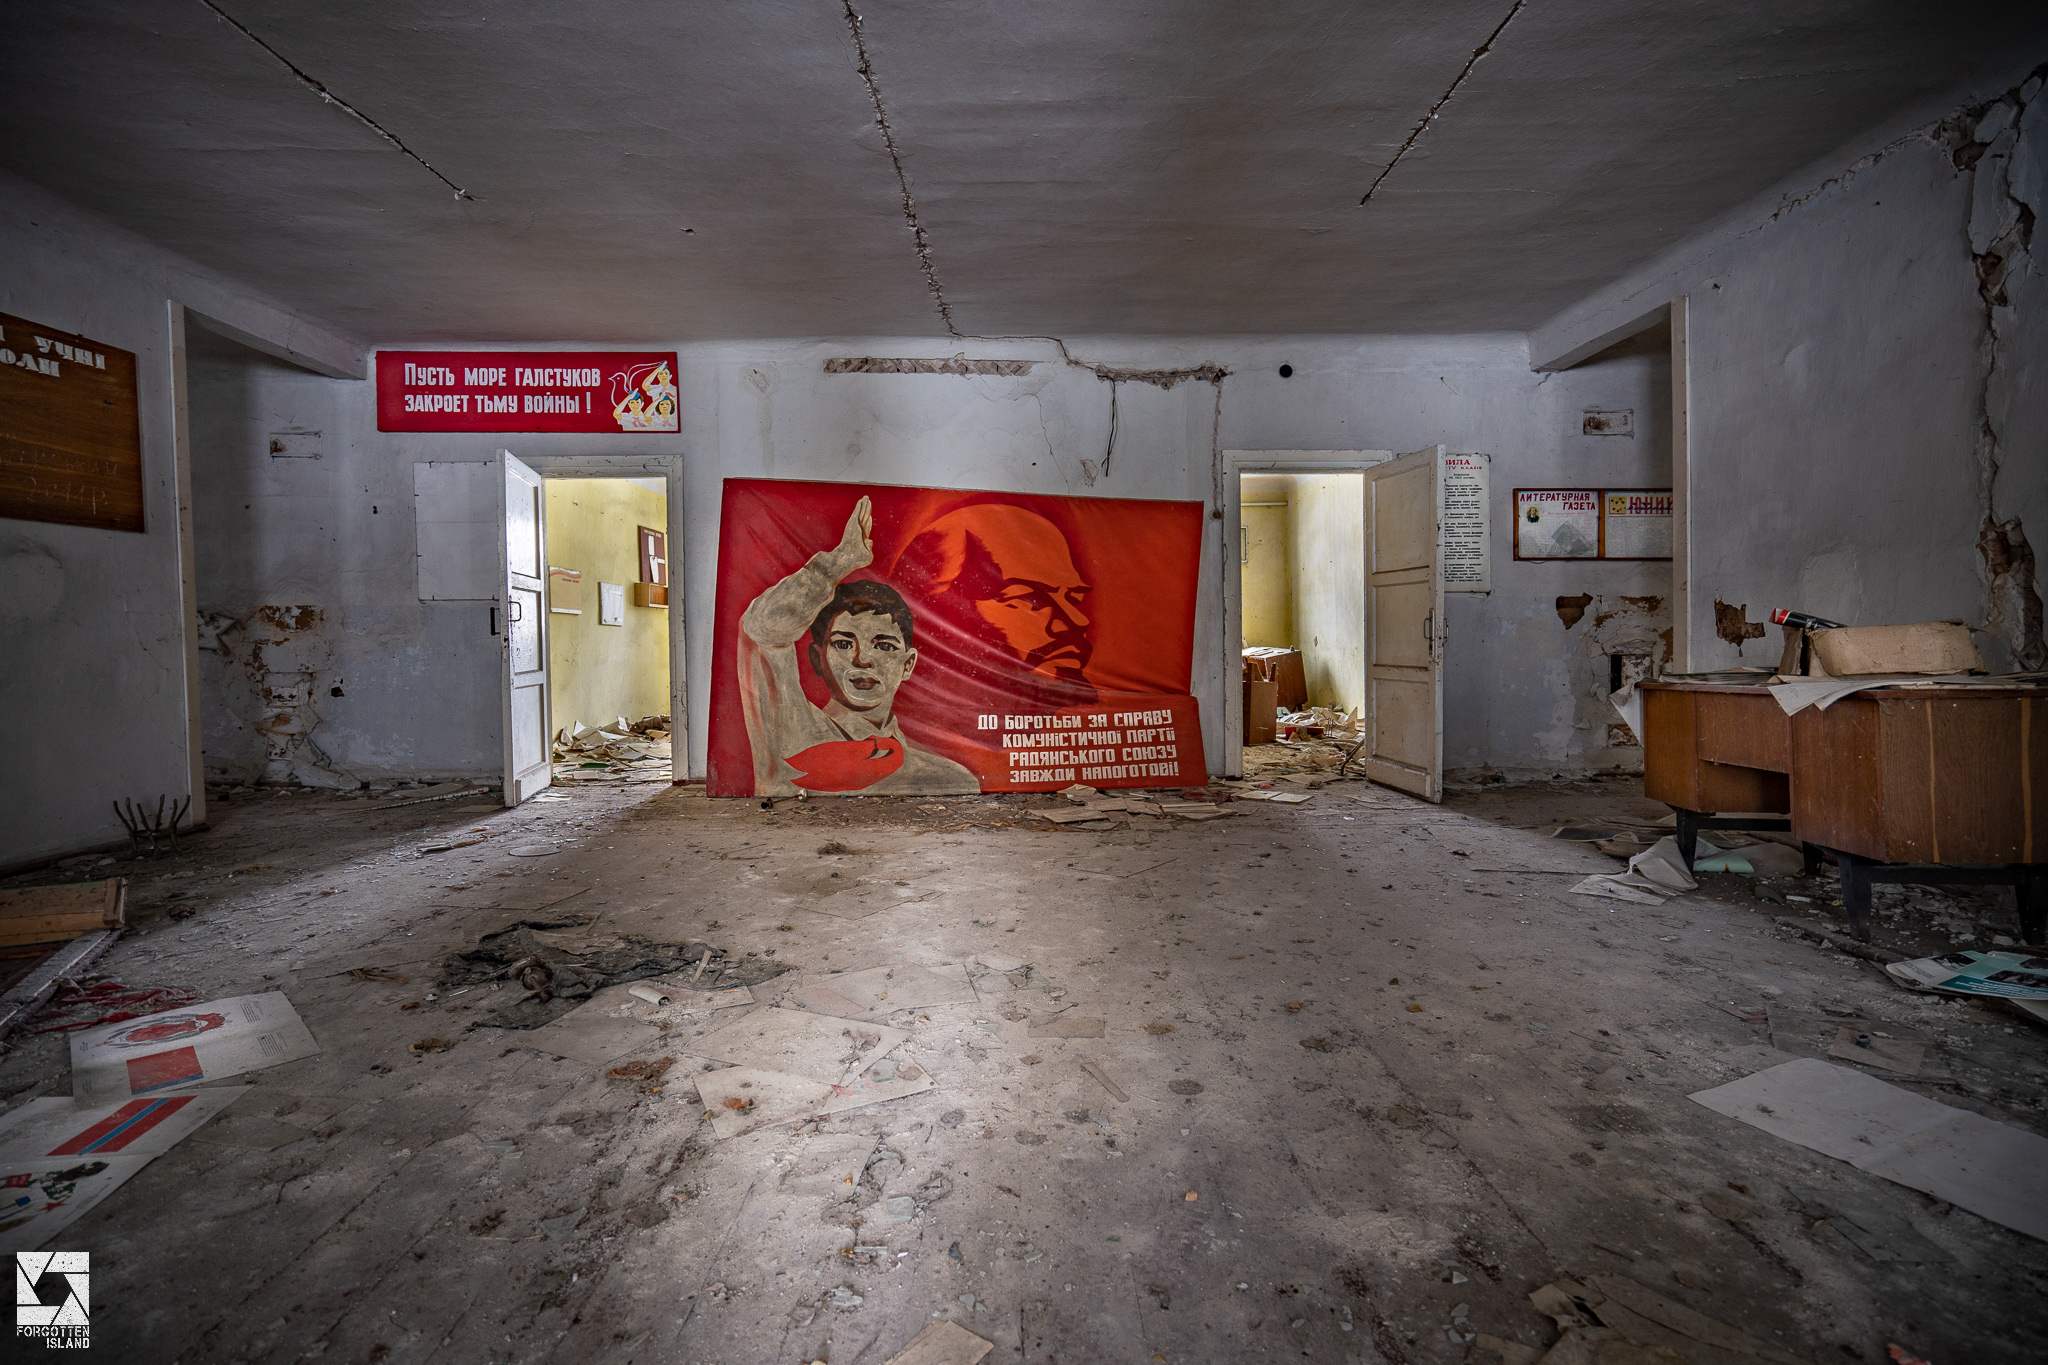 Mysterious Secondary School in the Chernobyl Zone